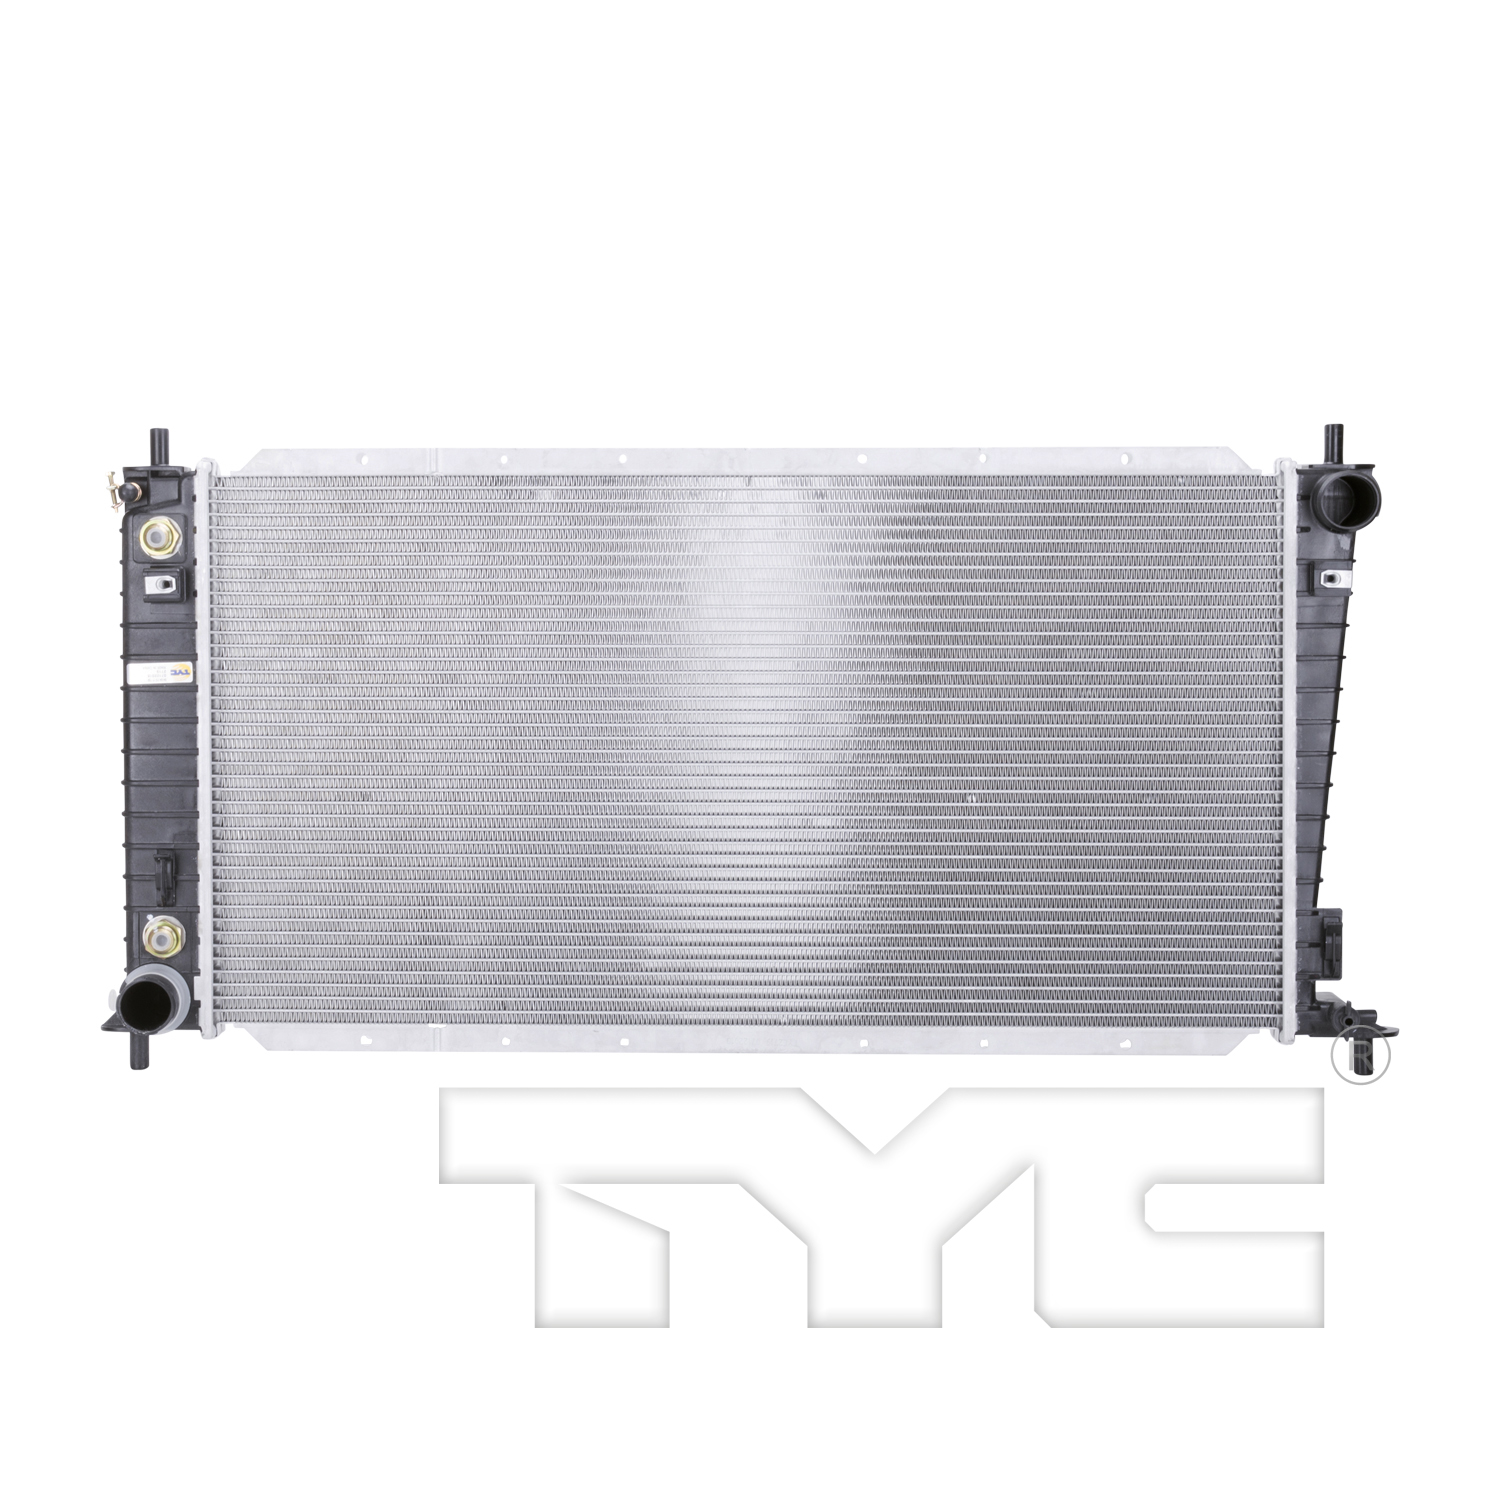 Aftermarket RADIATORS for FORD - F-150, F-150,04-08,Radiator assembly